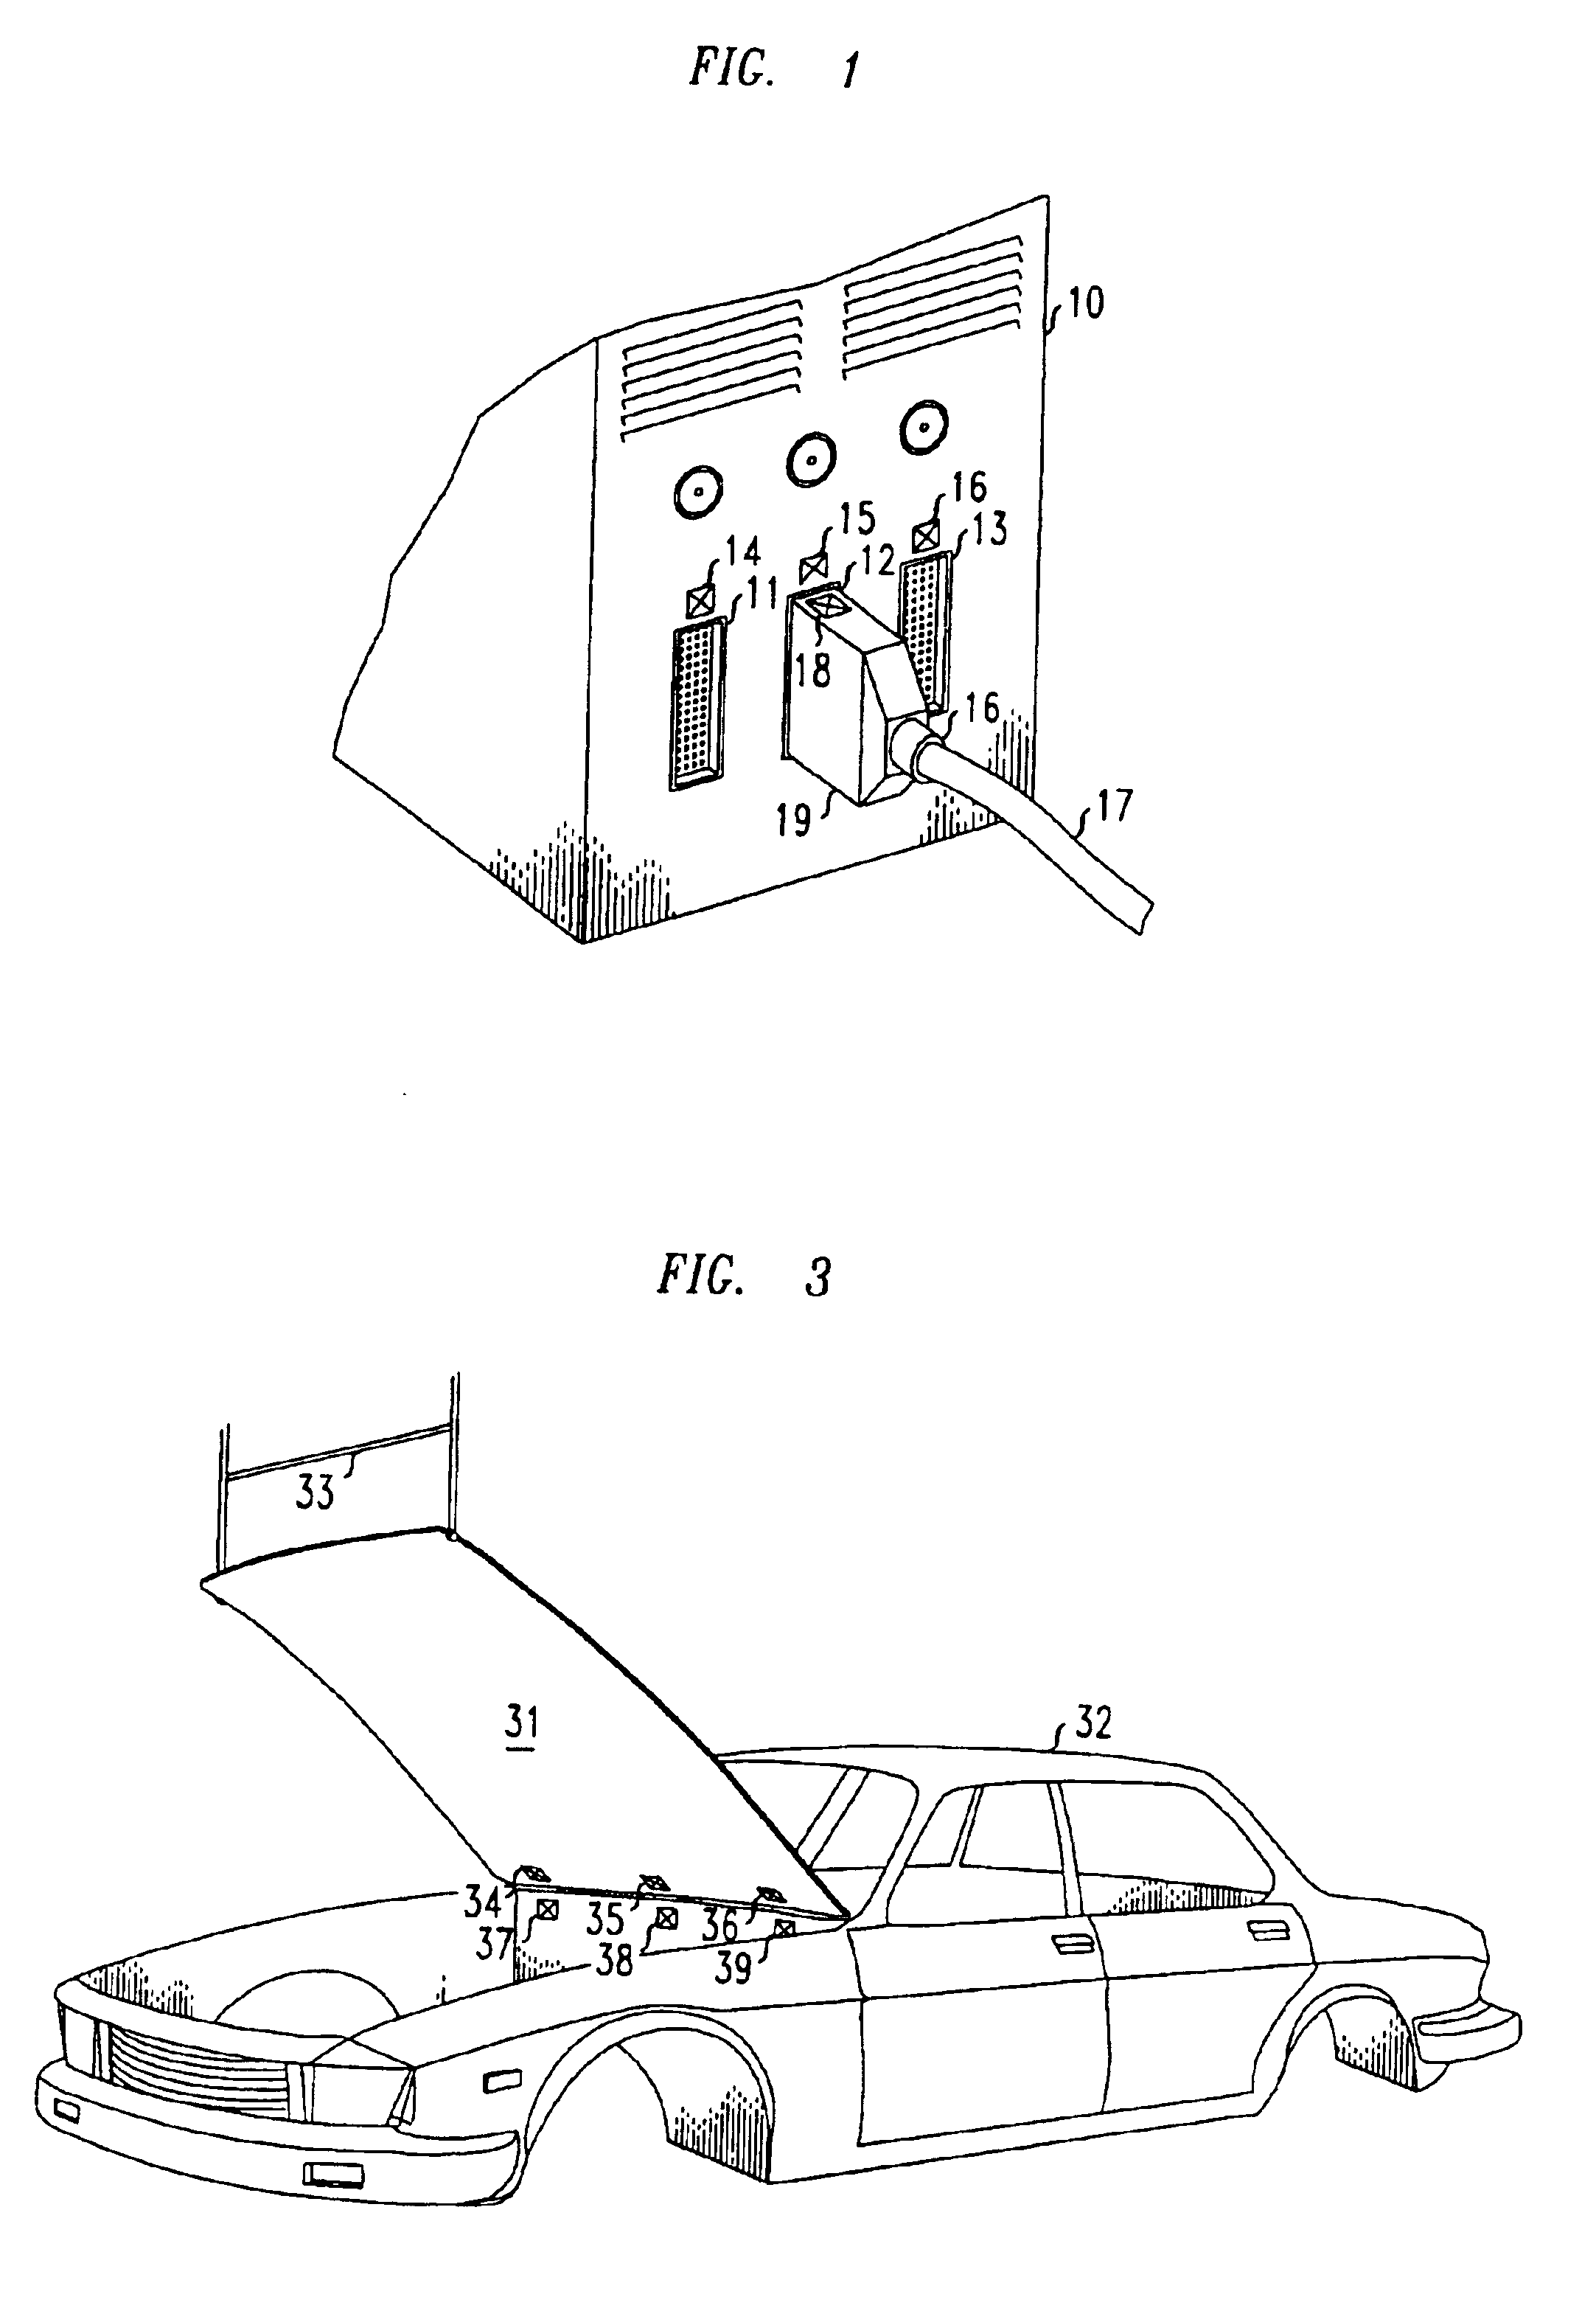 Method for determining juxtaposition of physical components with use of RFID tags